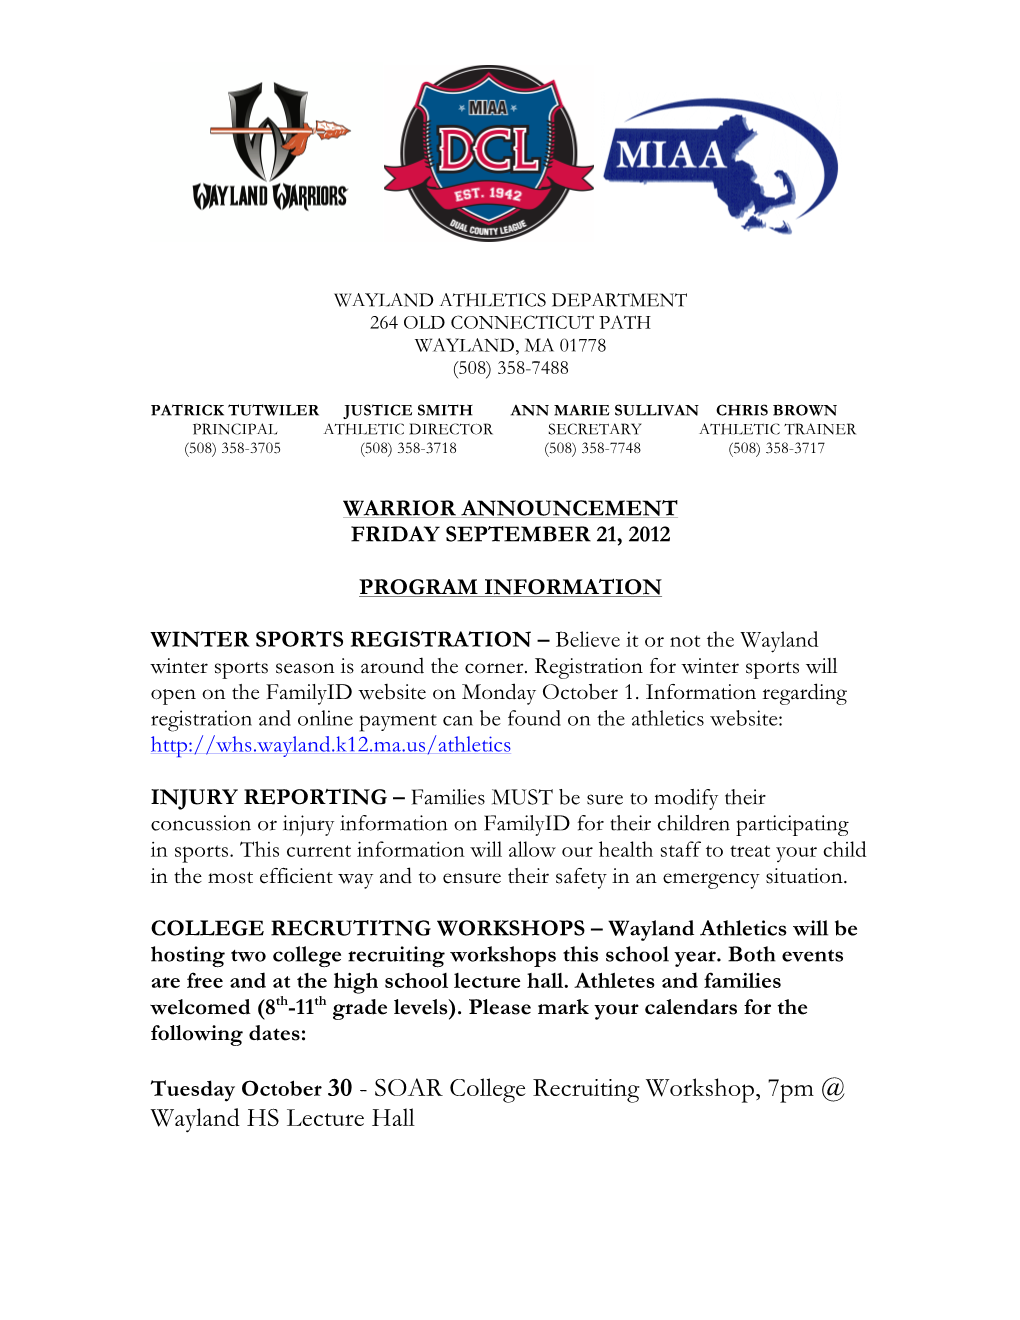 SOAR College Recruiting Workshop, 7Pm @ Wayland HS Lecture Hall